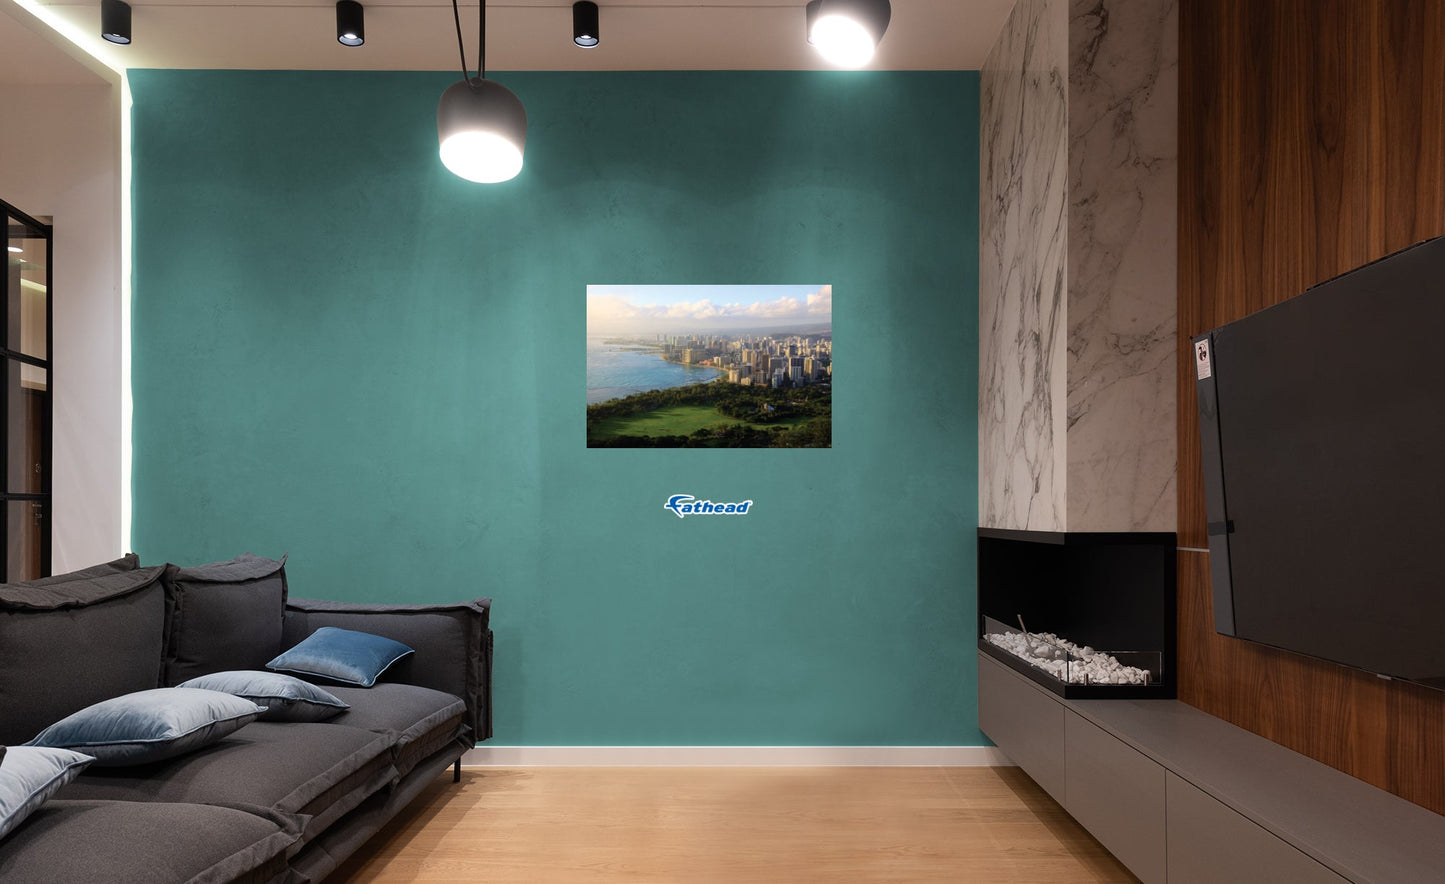 Generic Scenery: A New World Poster - Removable Adhesive Decal